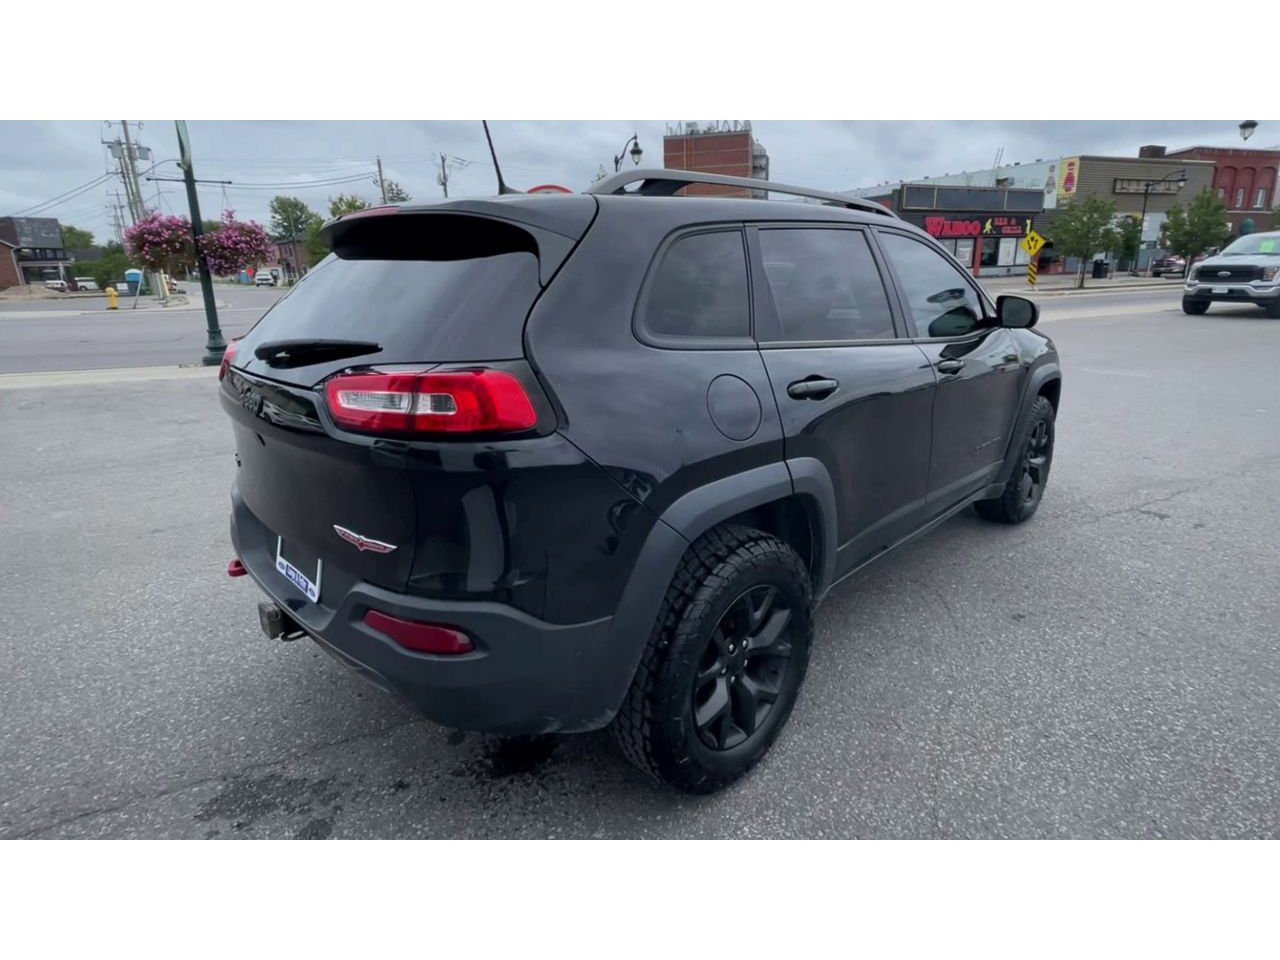 2016 Jeep Cherokee Trailhawk - P21241A Mobile Image 7